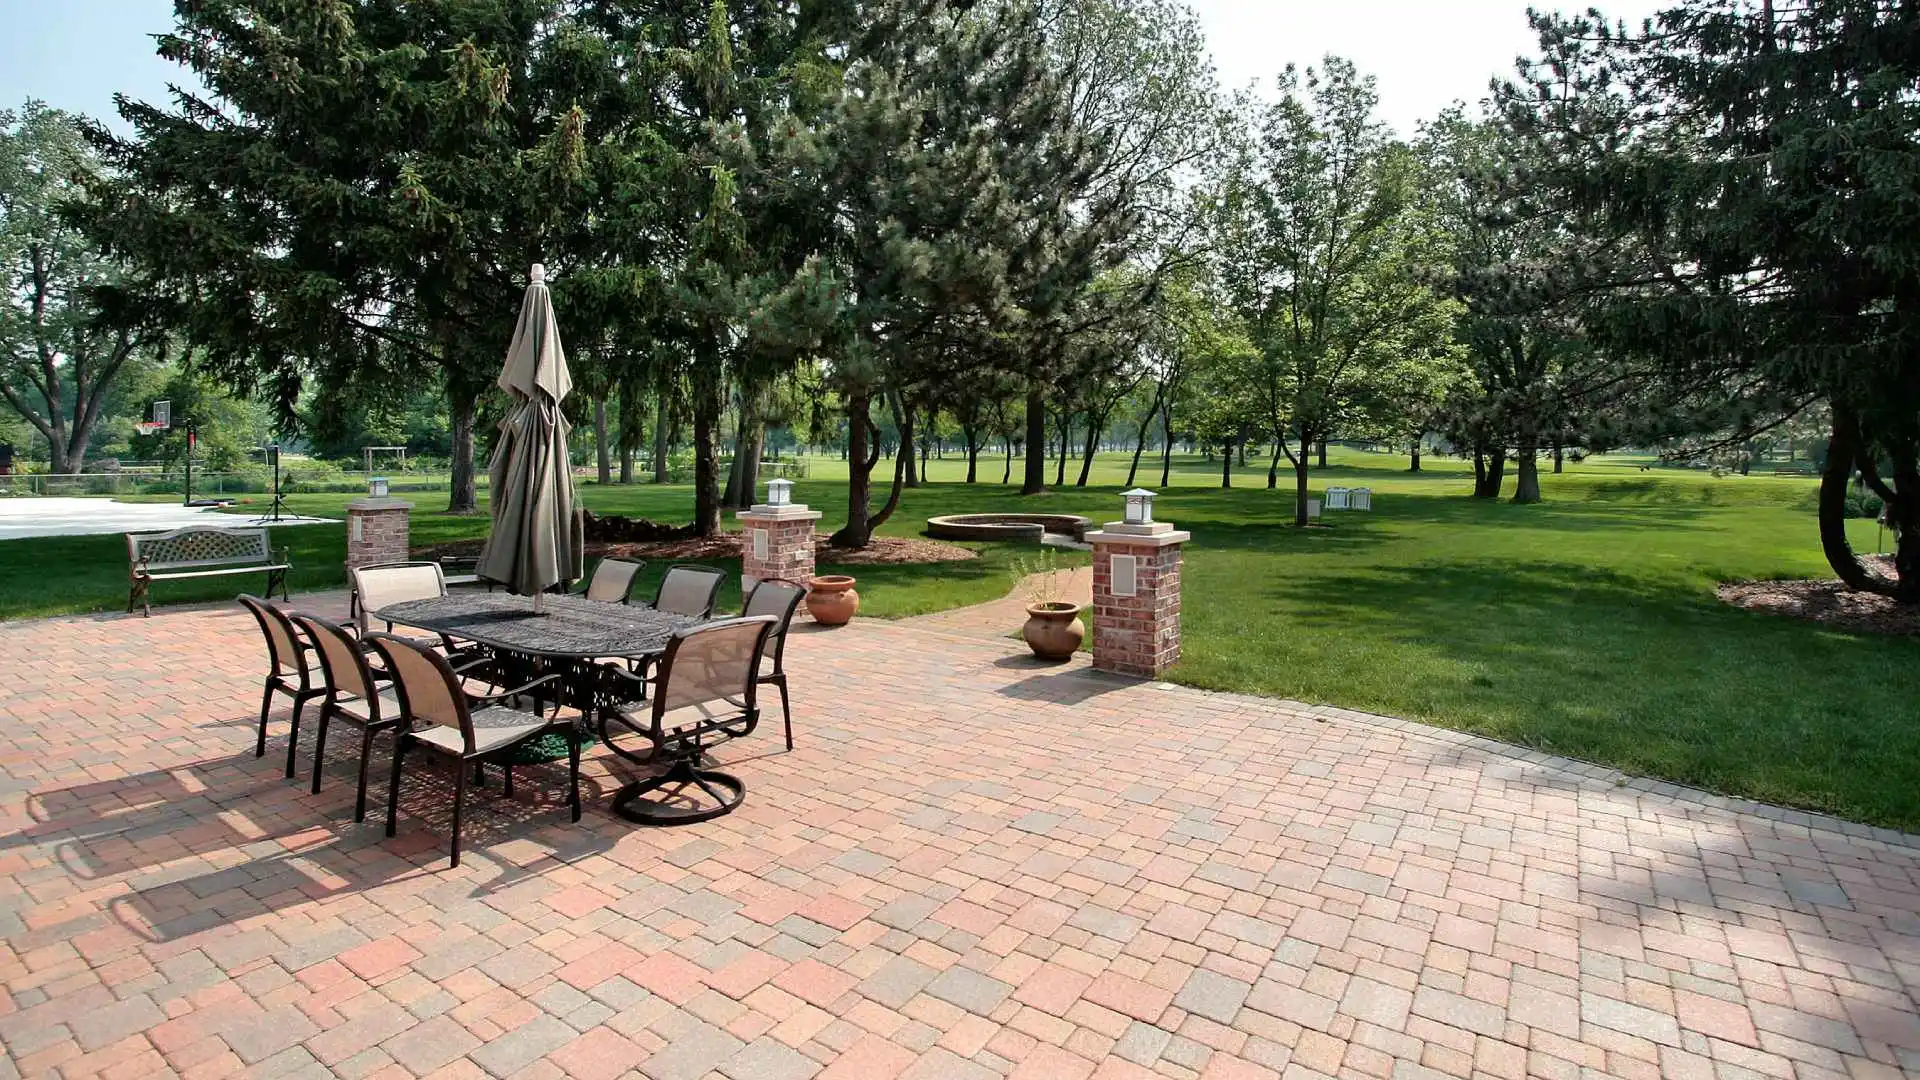 Red paver patio installed with patio set in Fauquier County, VA.